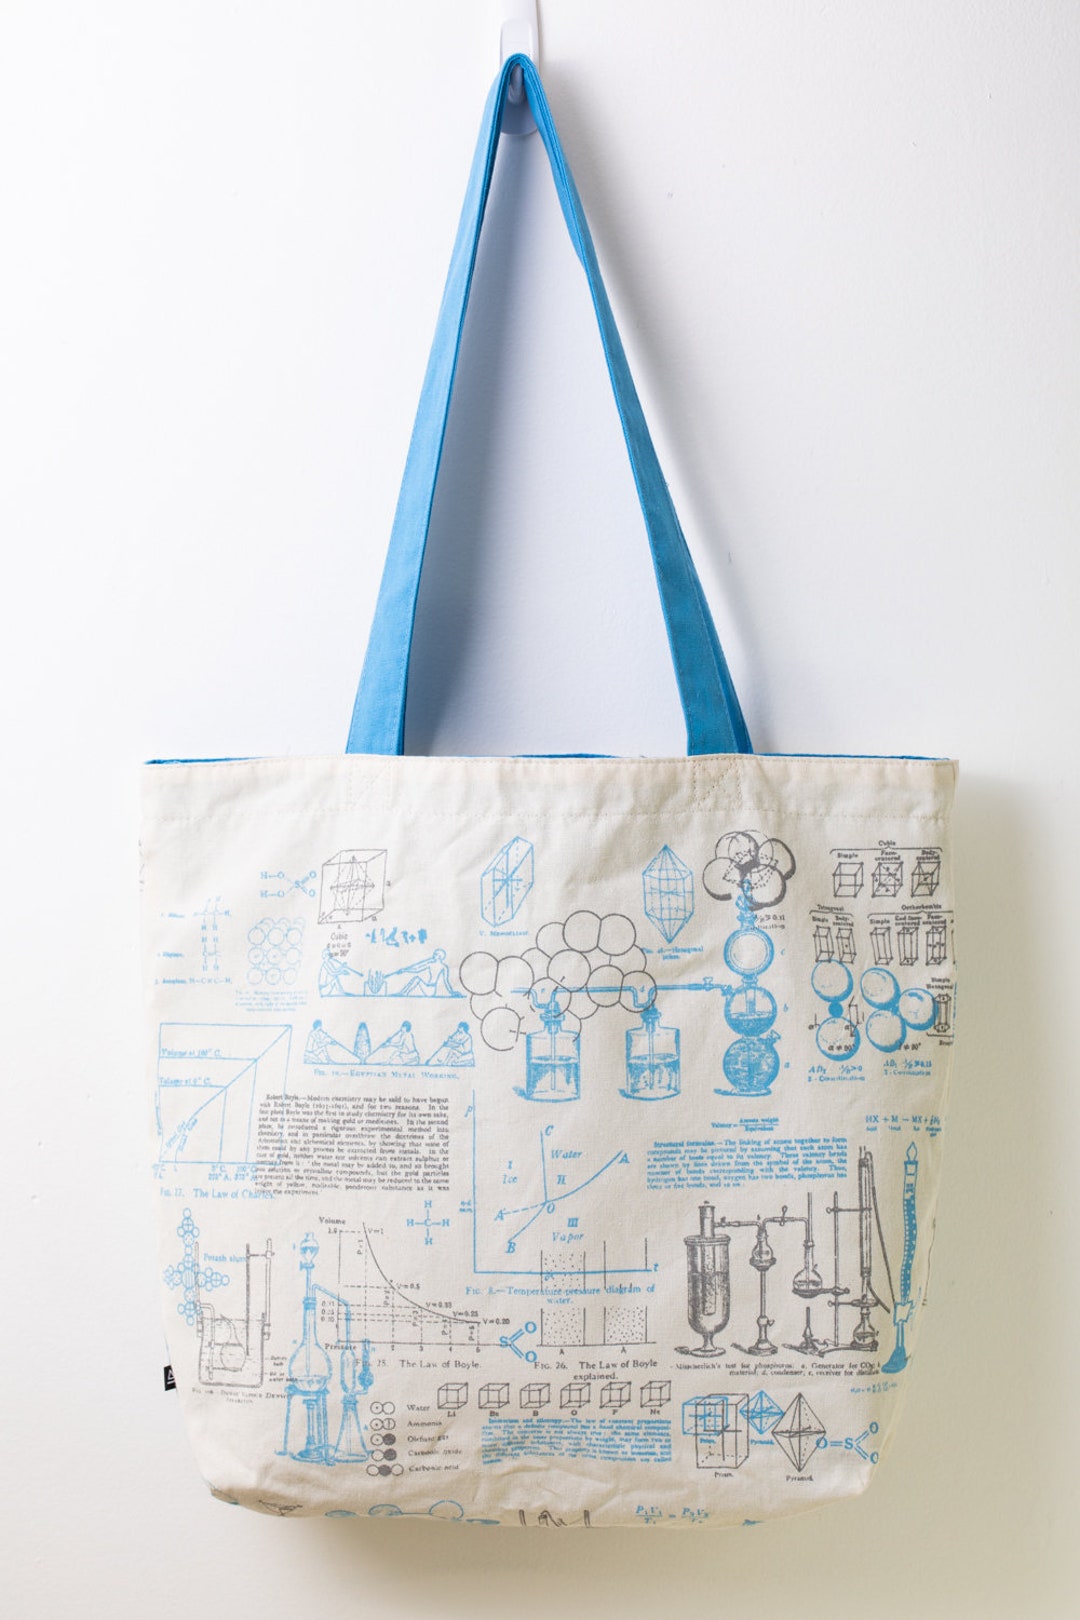 How to make an easy reversible tote bag - The Crafty Gentleman